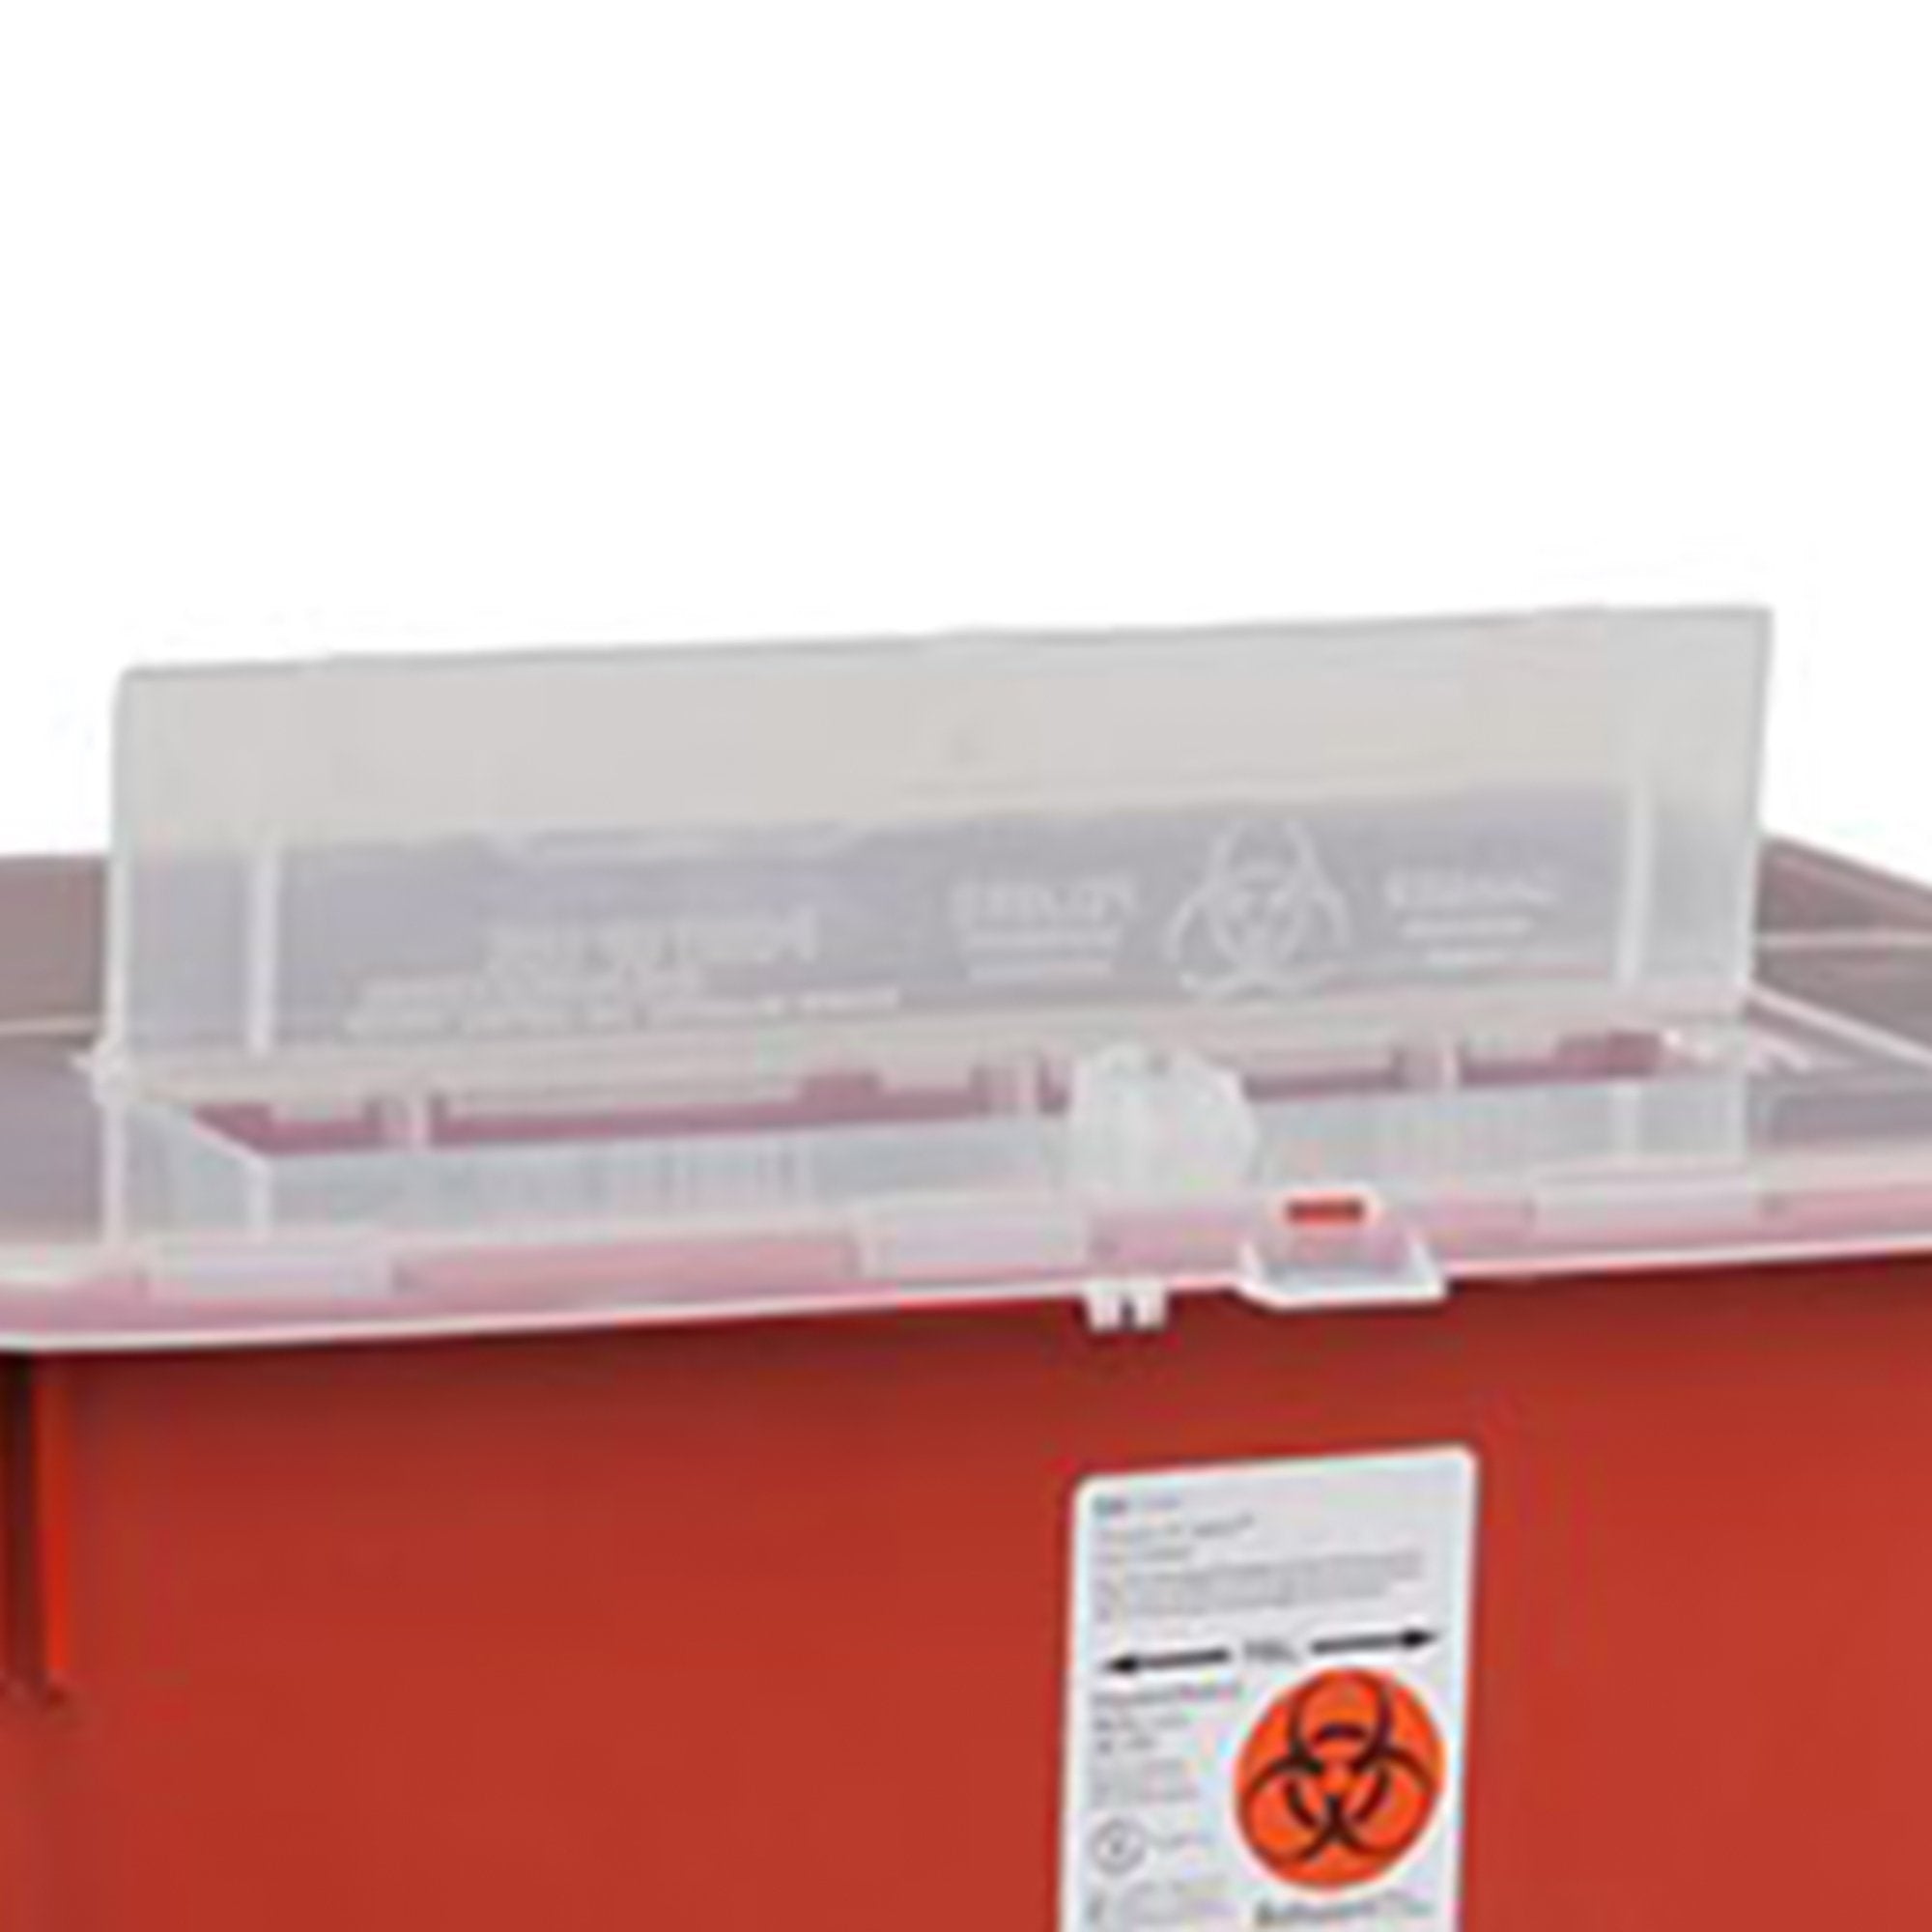 Sharps Container Sharps-A-Gator™ Red Base 15-1/2 H X 21-1/2 W X 12 D Inch Horizontal Entry 10 Gallon